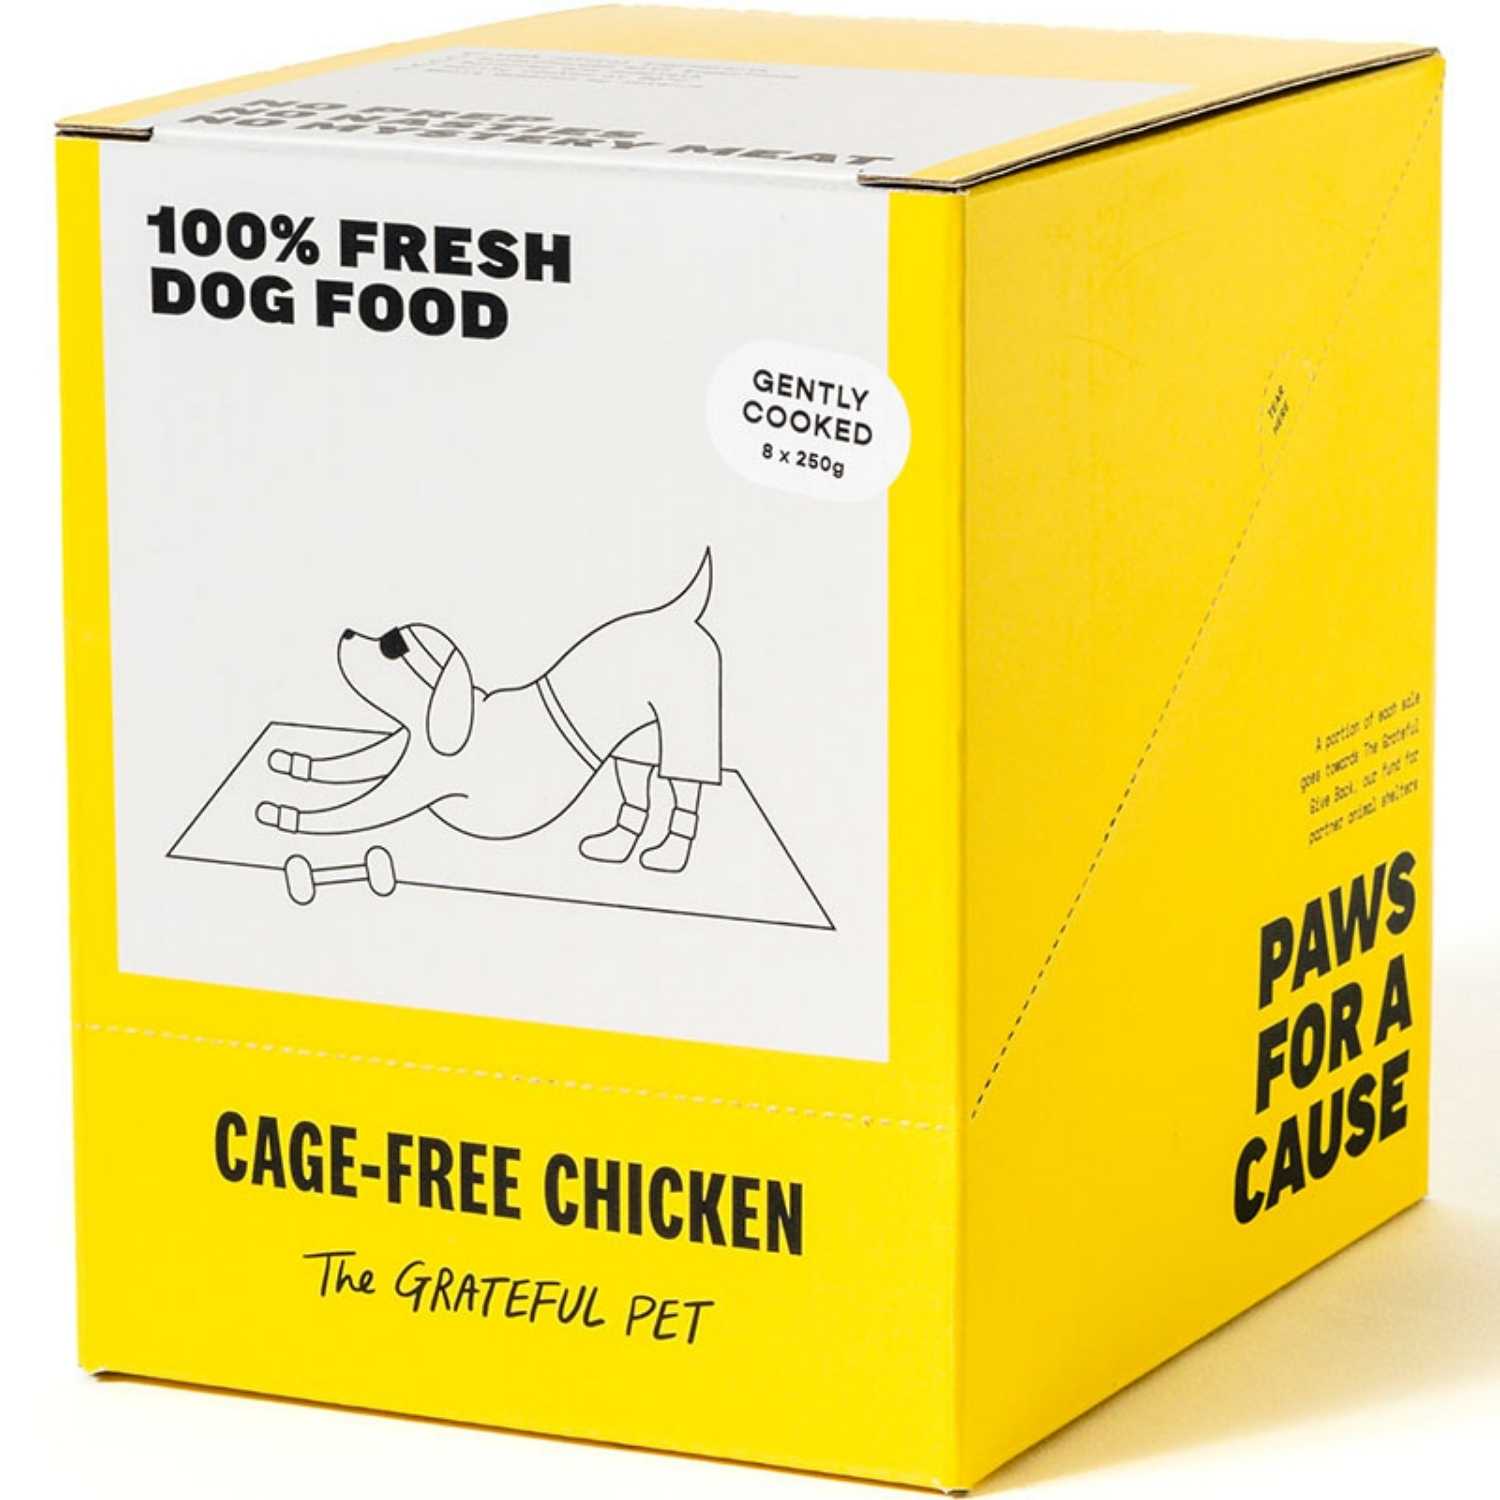 The Grateful Pet - Gently Cooked (Cage-Free Chicken) - Dog (8 x 250g Pouch) Food (Case)